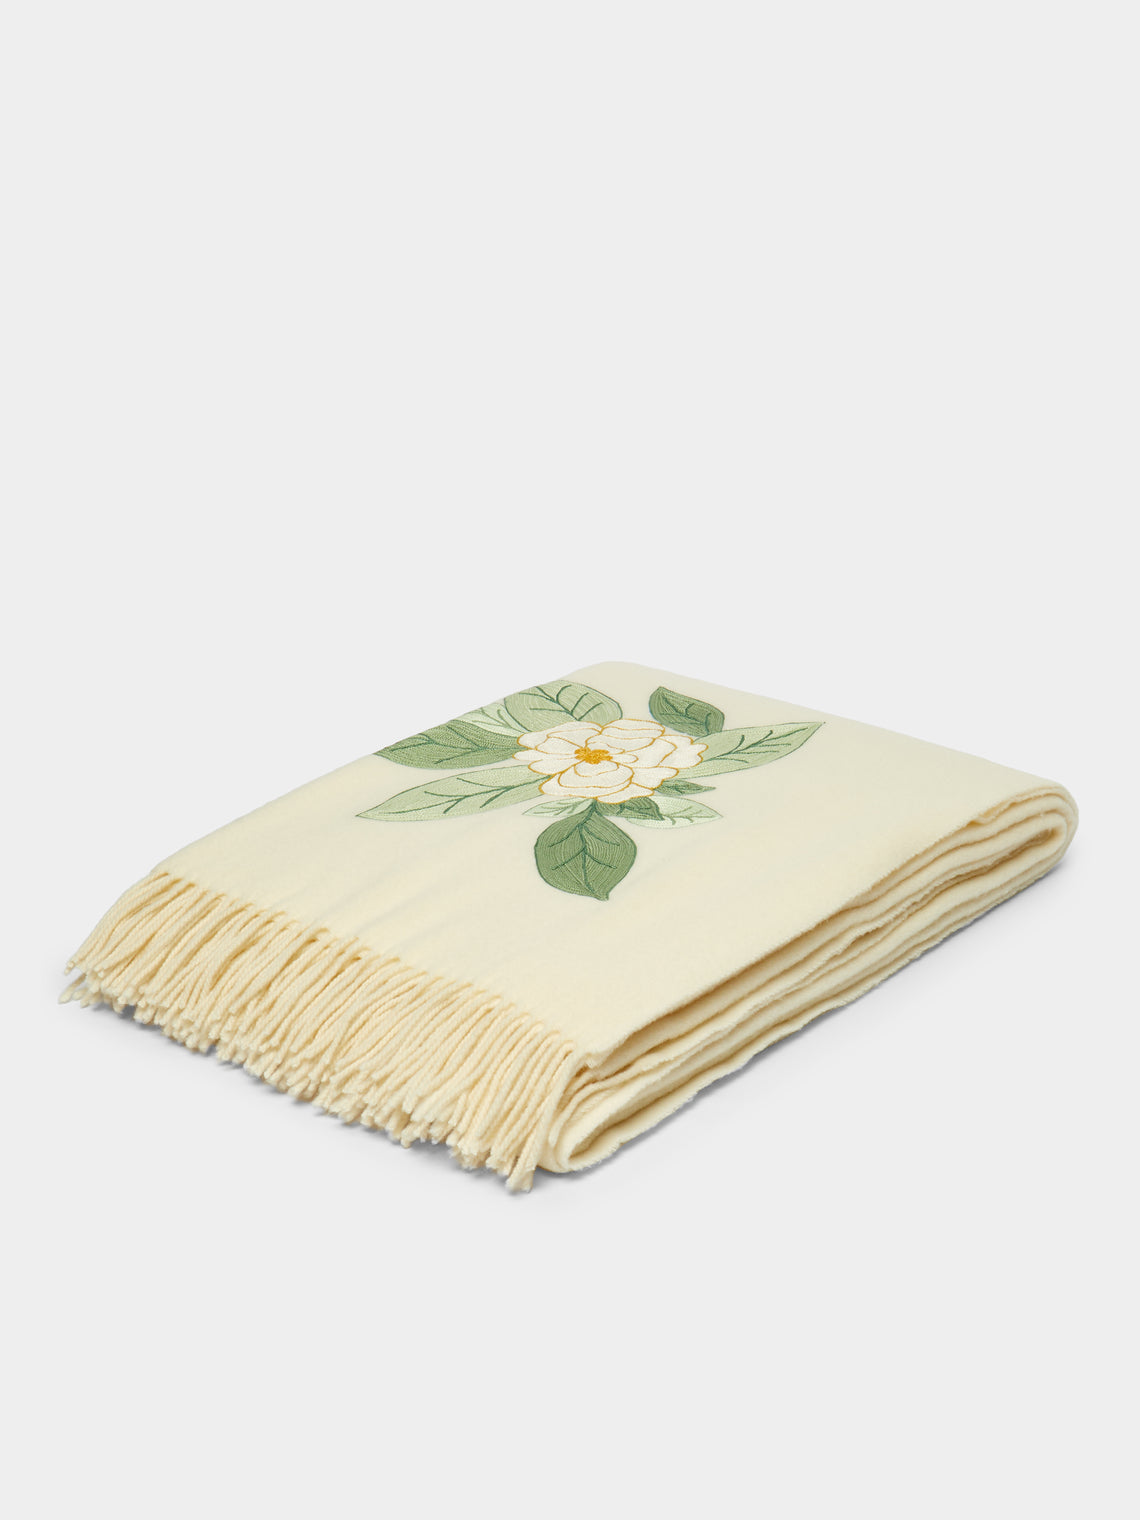 Loretta Caponi - Camellia Hand-Embroidered Wool Blanket -  - ABASK